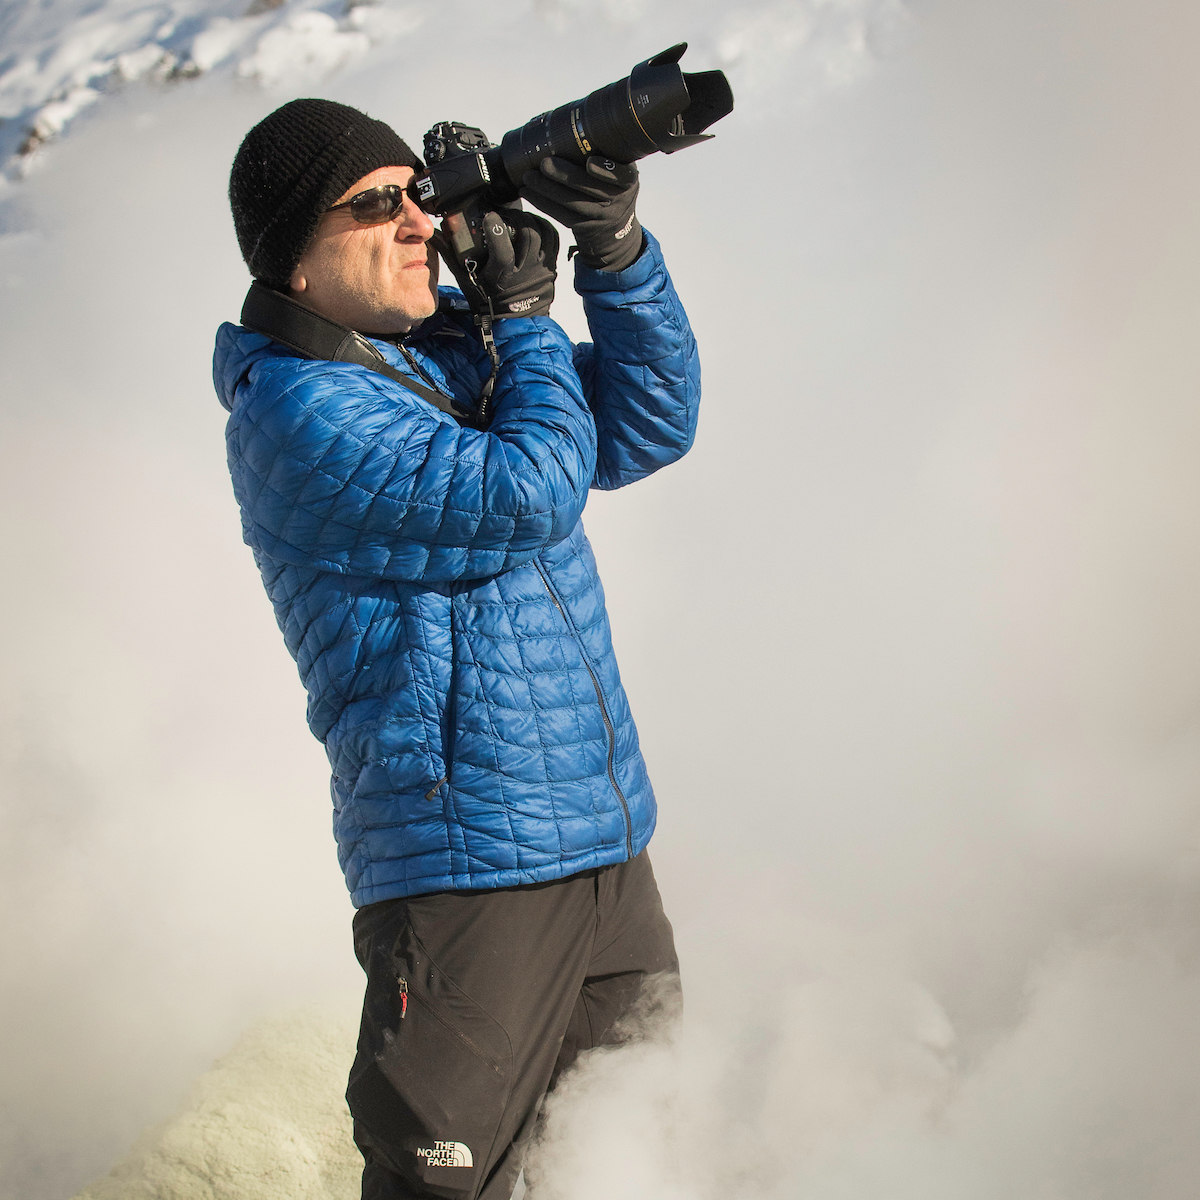 Interview with Travel Photographer Mark Edward Harris